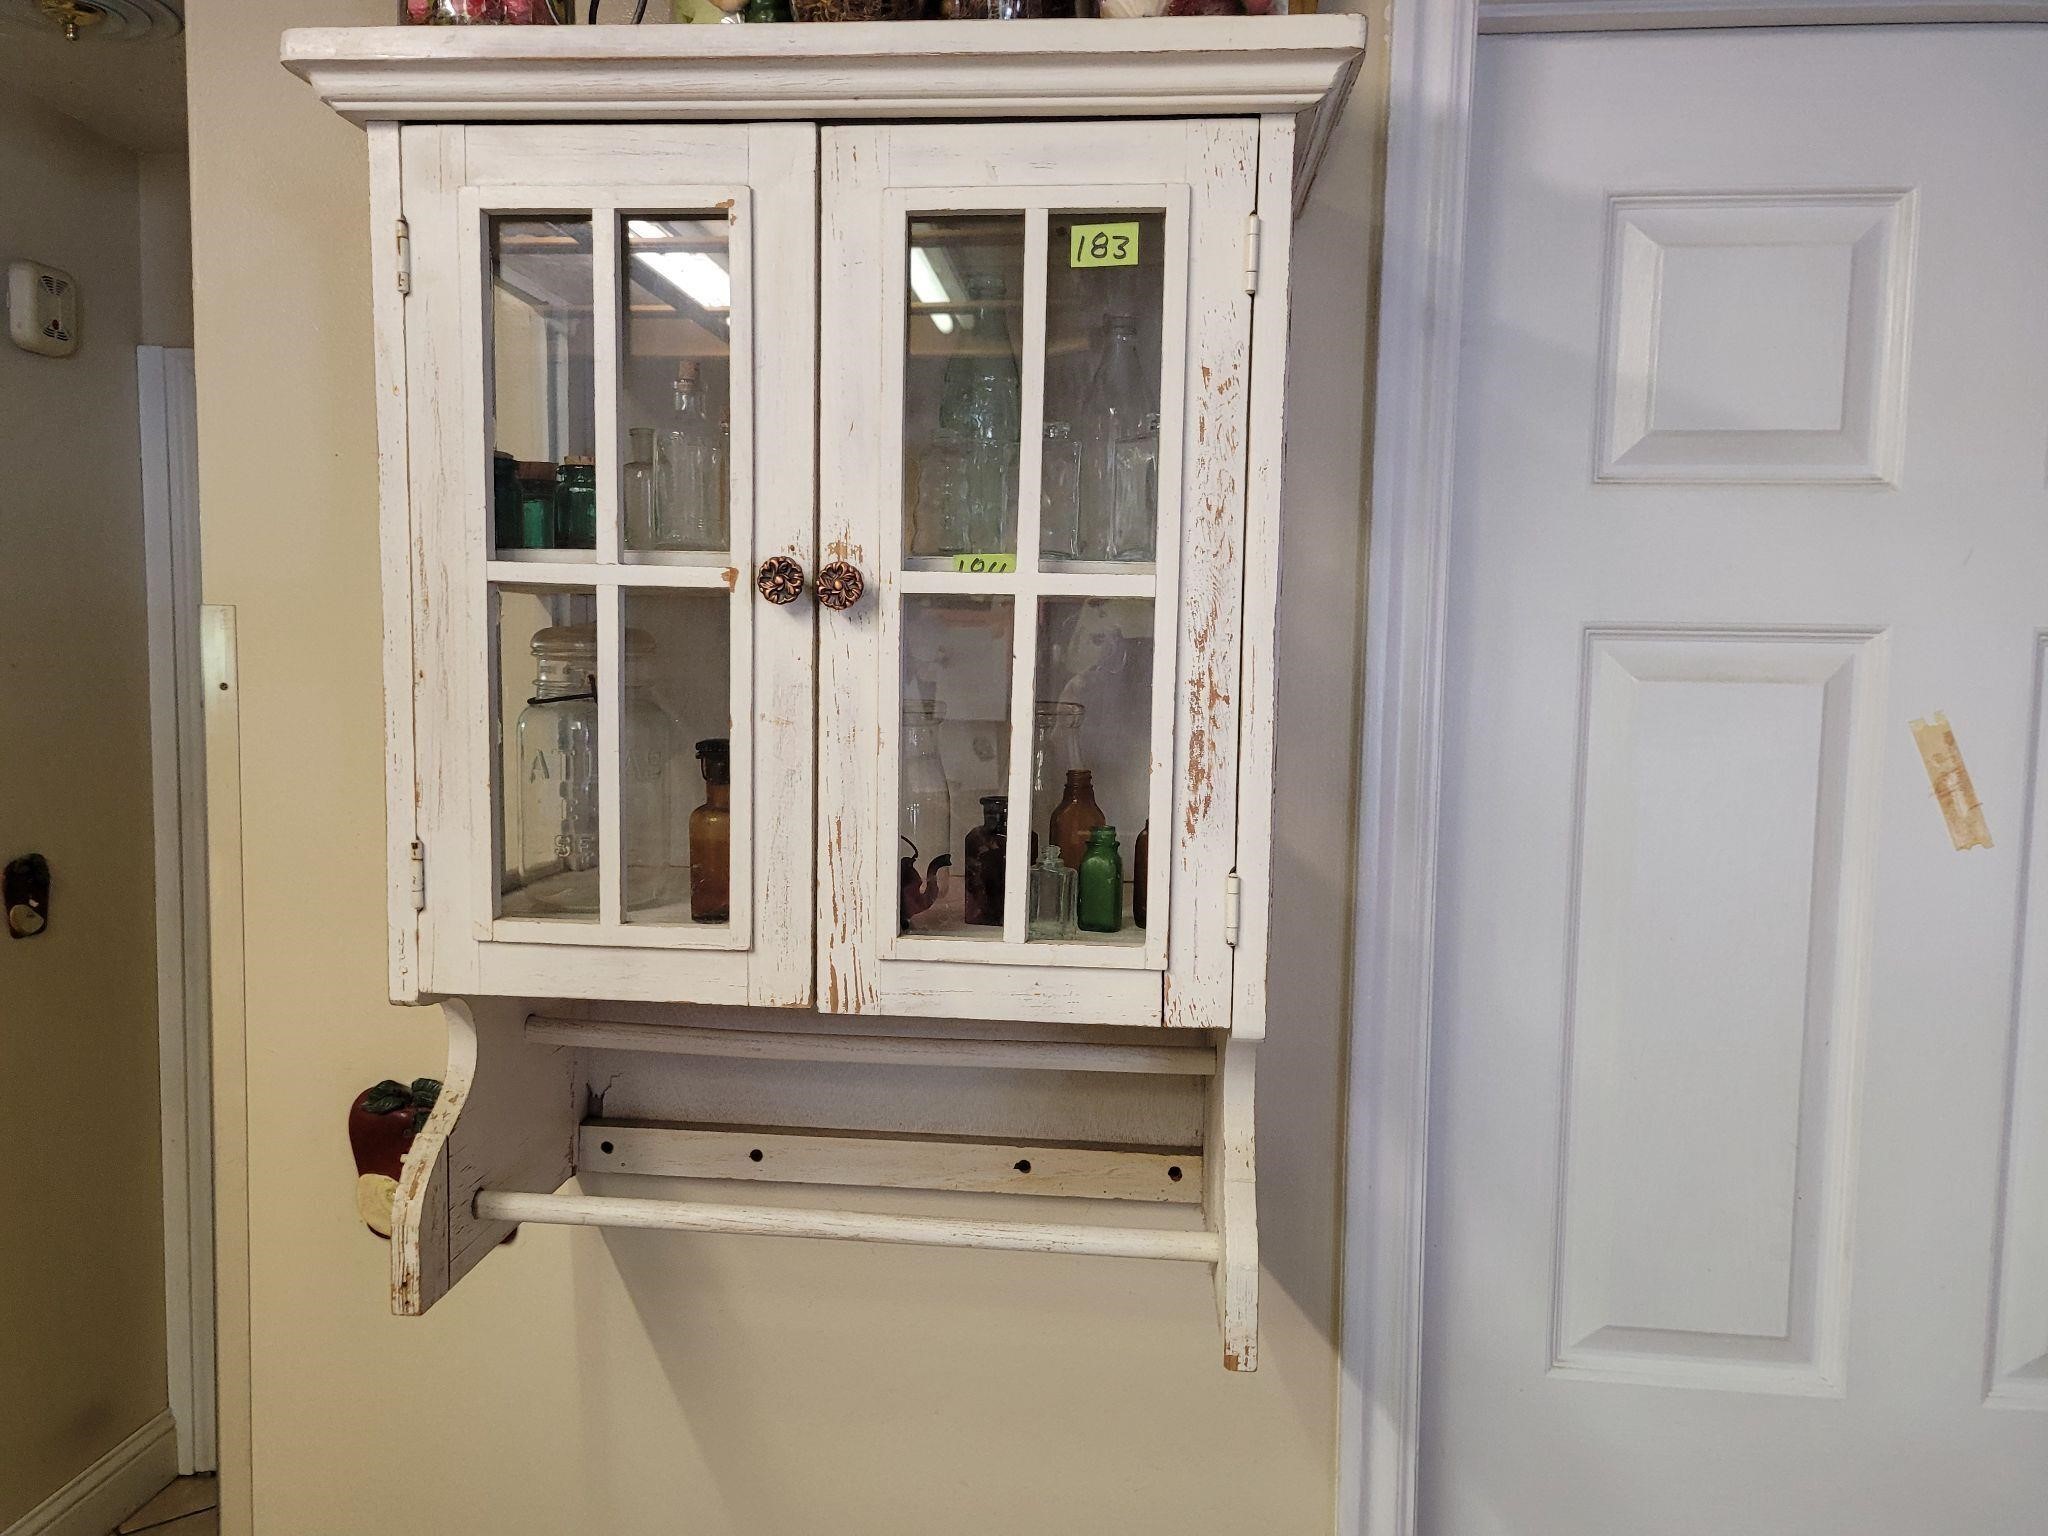 Farm Style Wall Cabinet. Contents not included